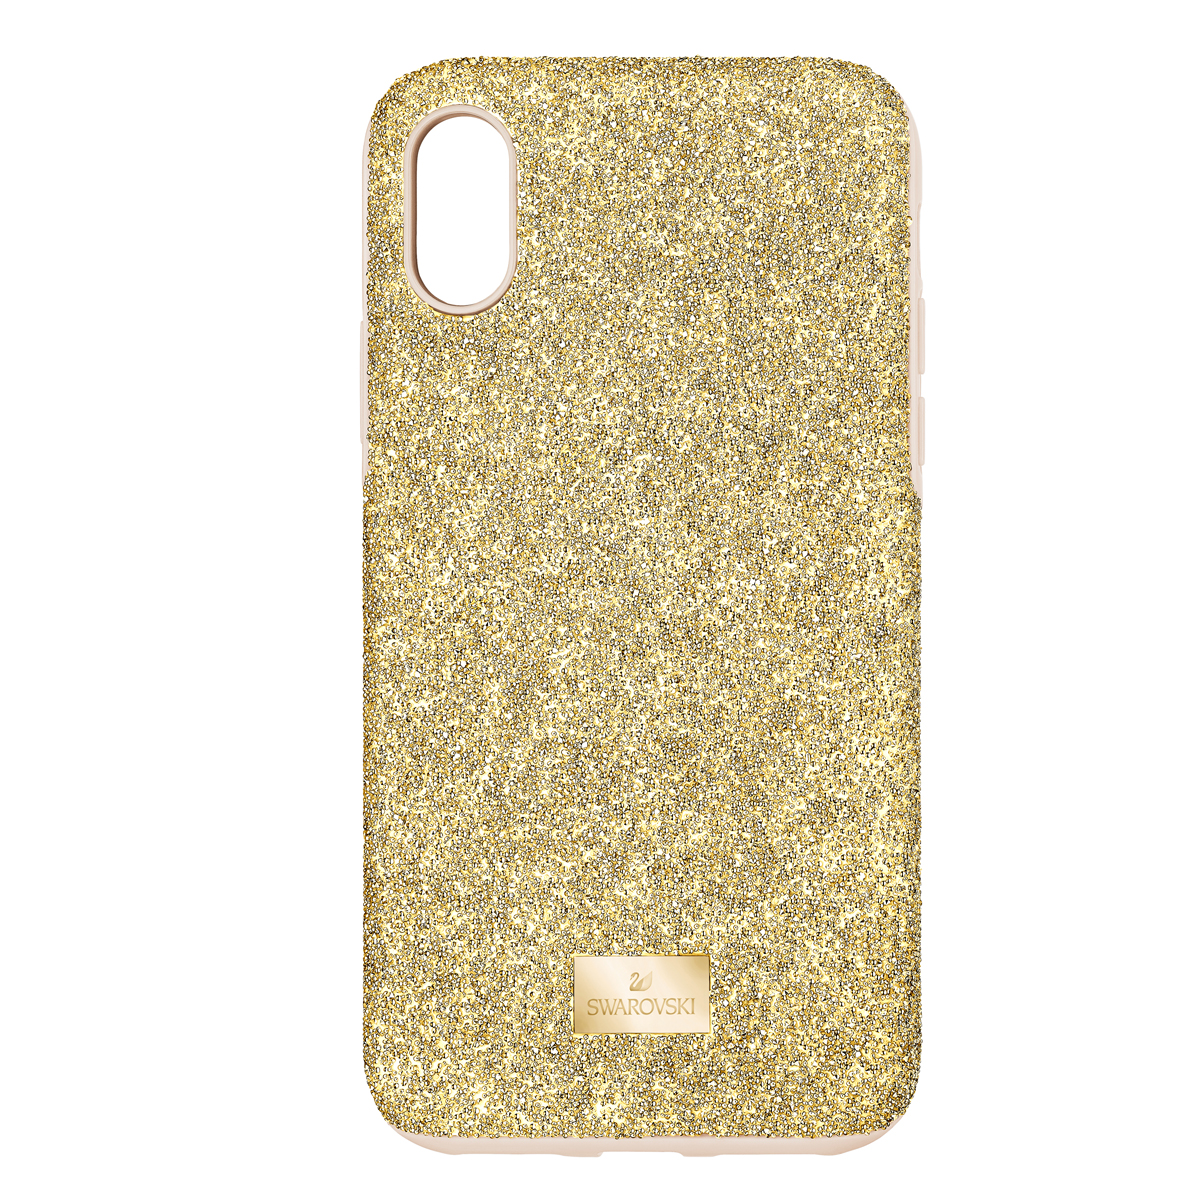 Swarovski Mobile Phone Case High iPhone X Case Gold Stainless Steel Shiny Gold